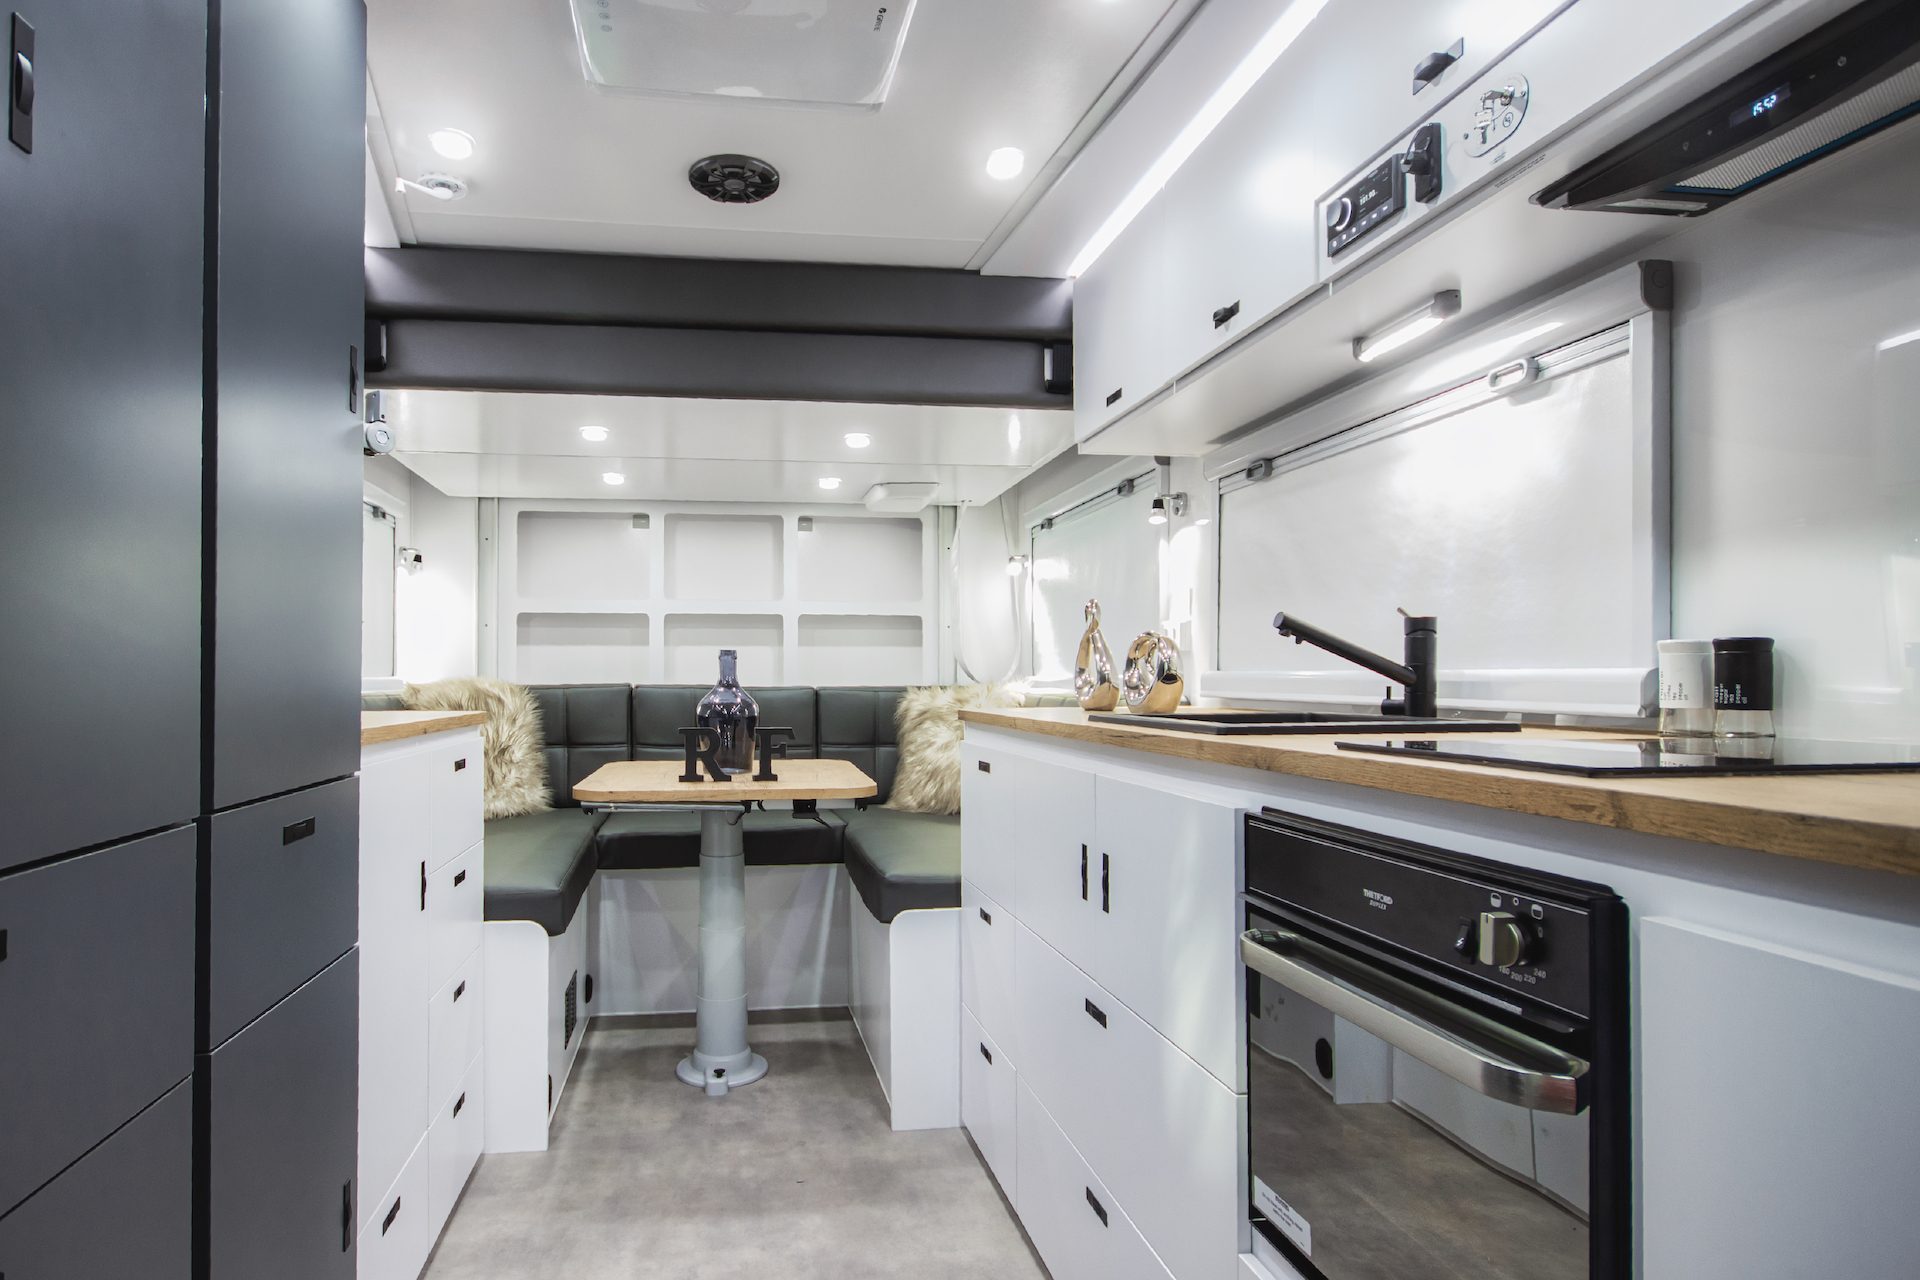 Royal Flair Aussiemate caravan with cozy kitchen seating, natural light, and integrated storage